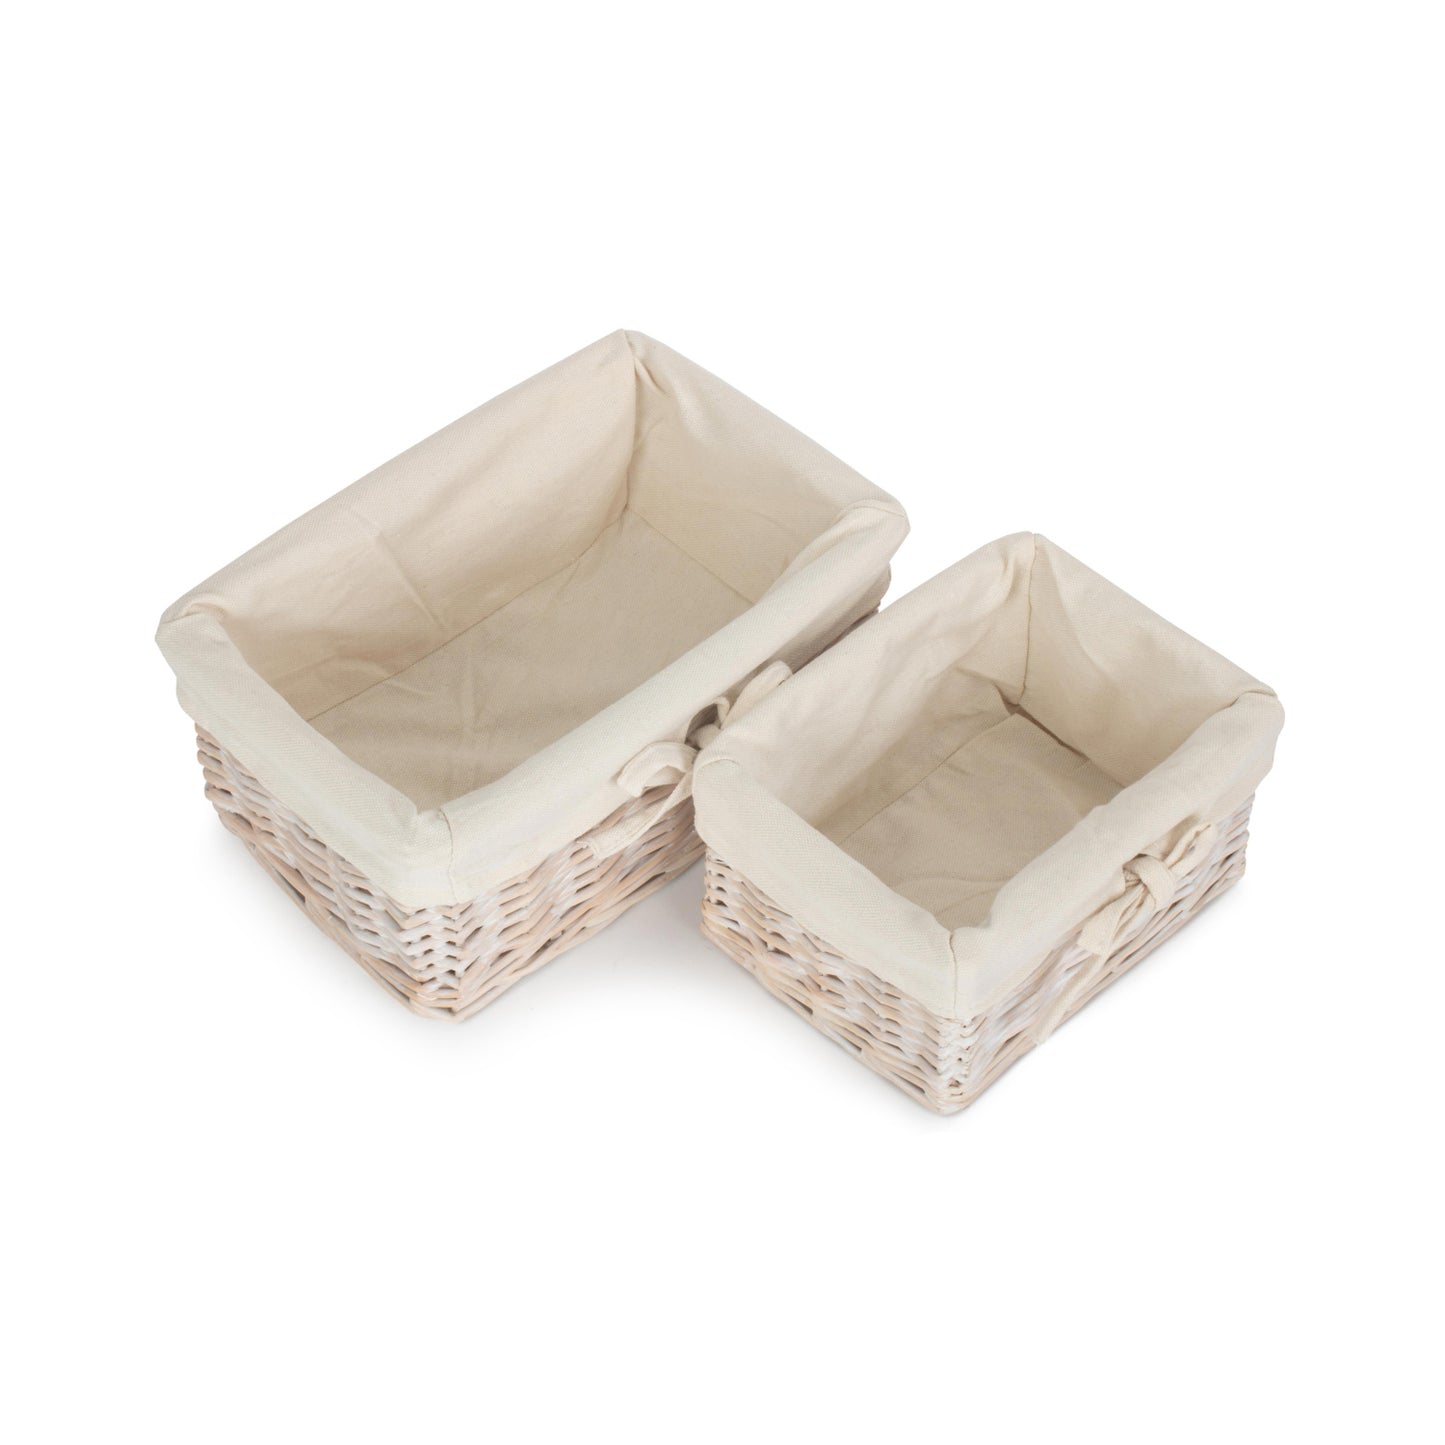 White Wash Finish Willow Tray With Lining Set 2